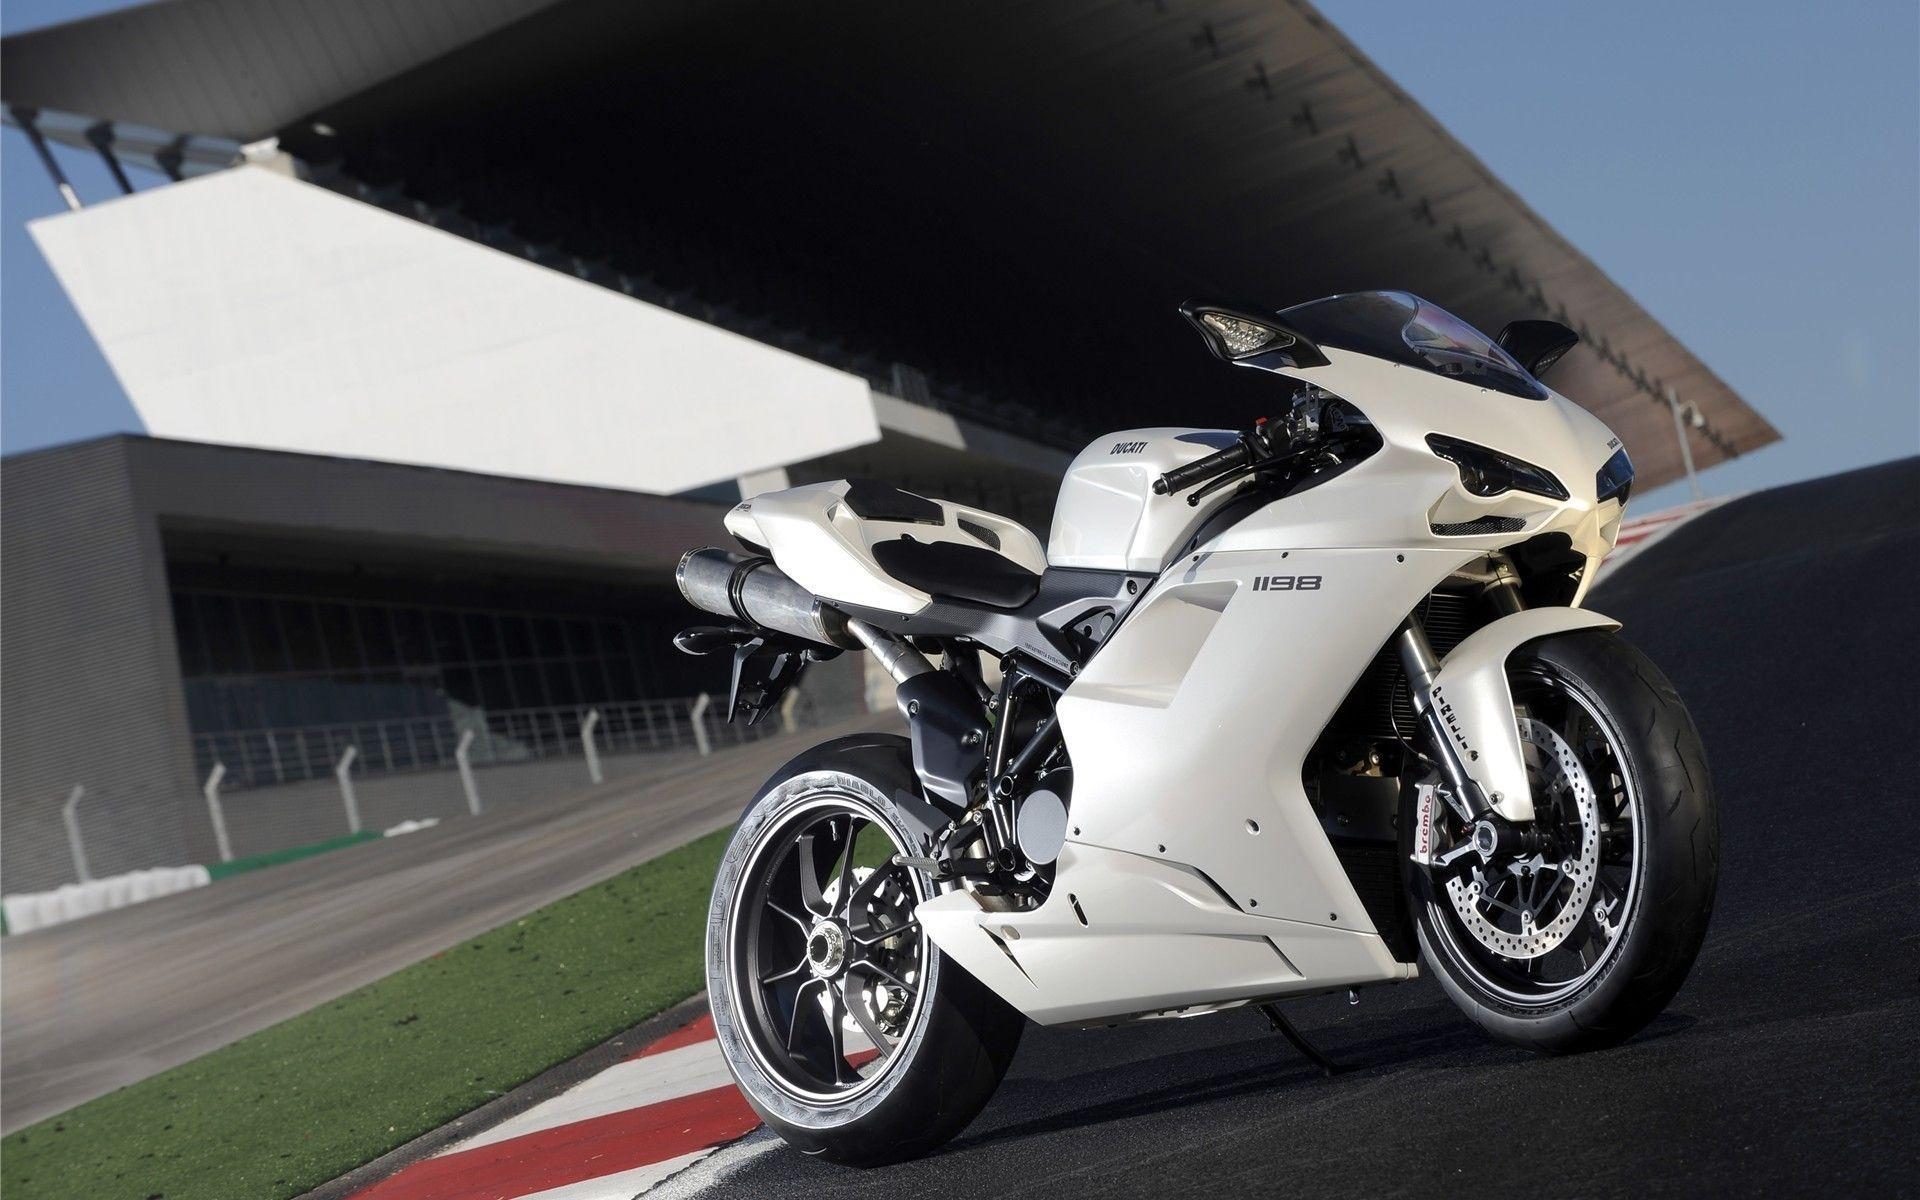 Ducati Superbike Wallpaper For Android